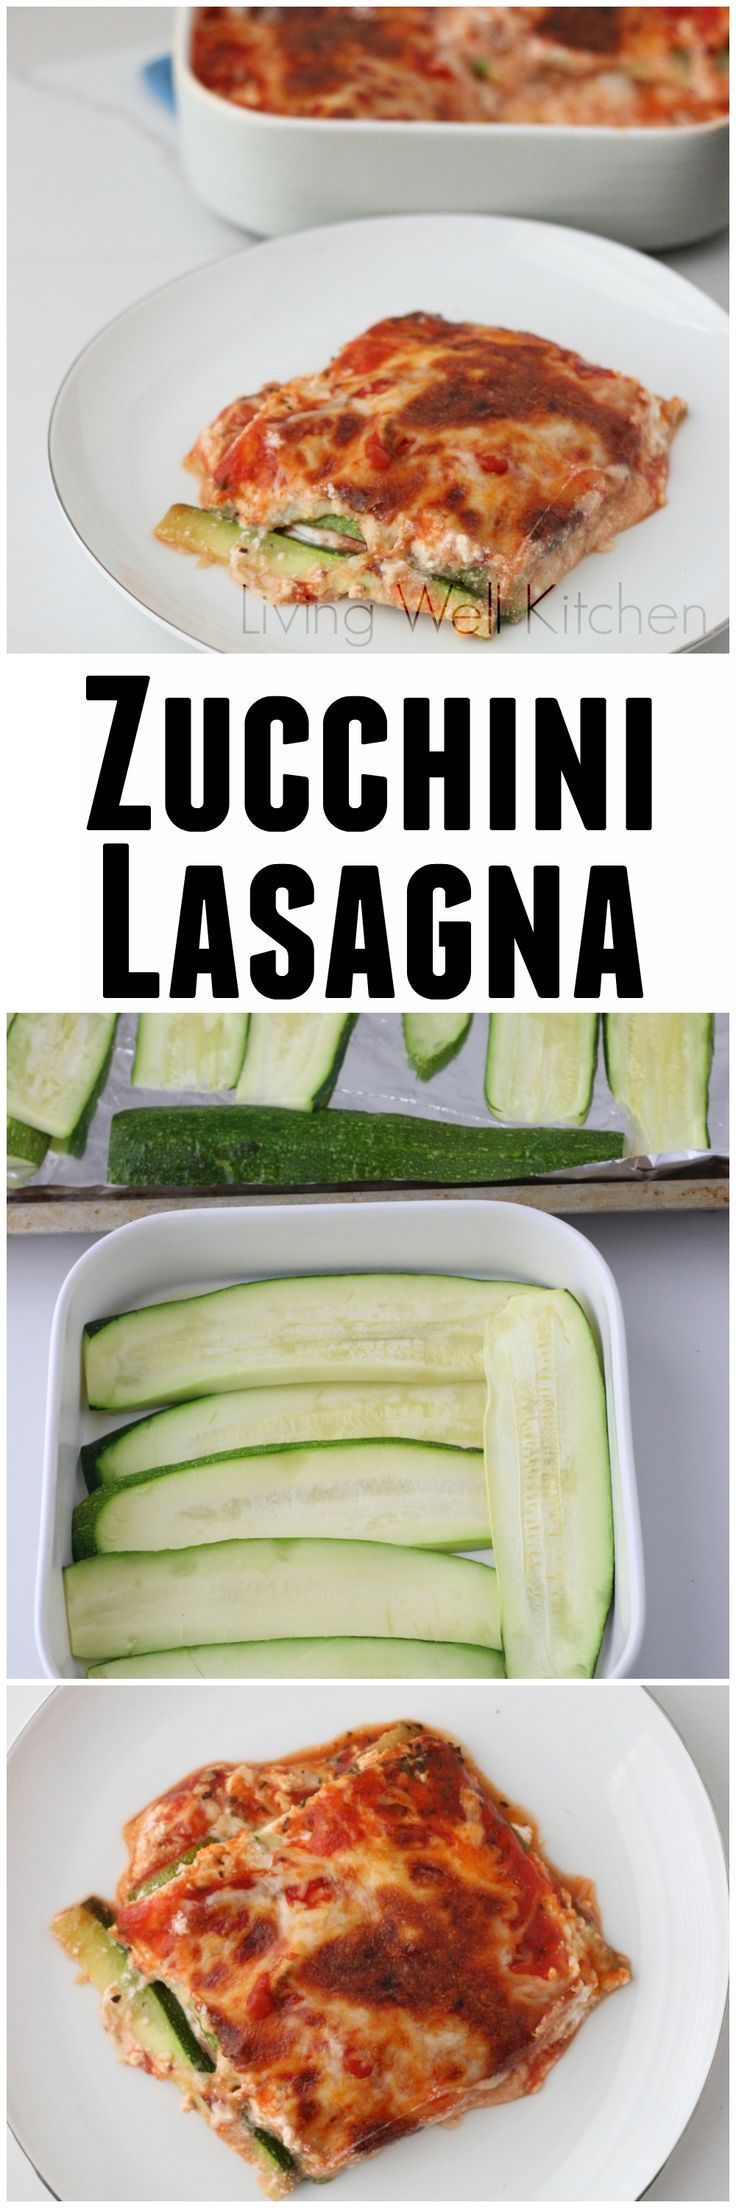 A fresh, summer take on a comfort food classic: Zucchini Lasagna from Living Well Kitchen @Meme Inge